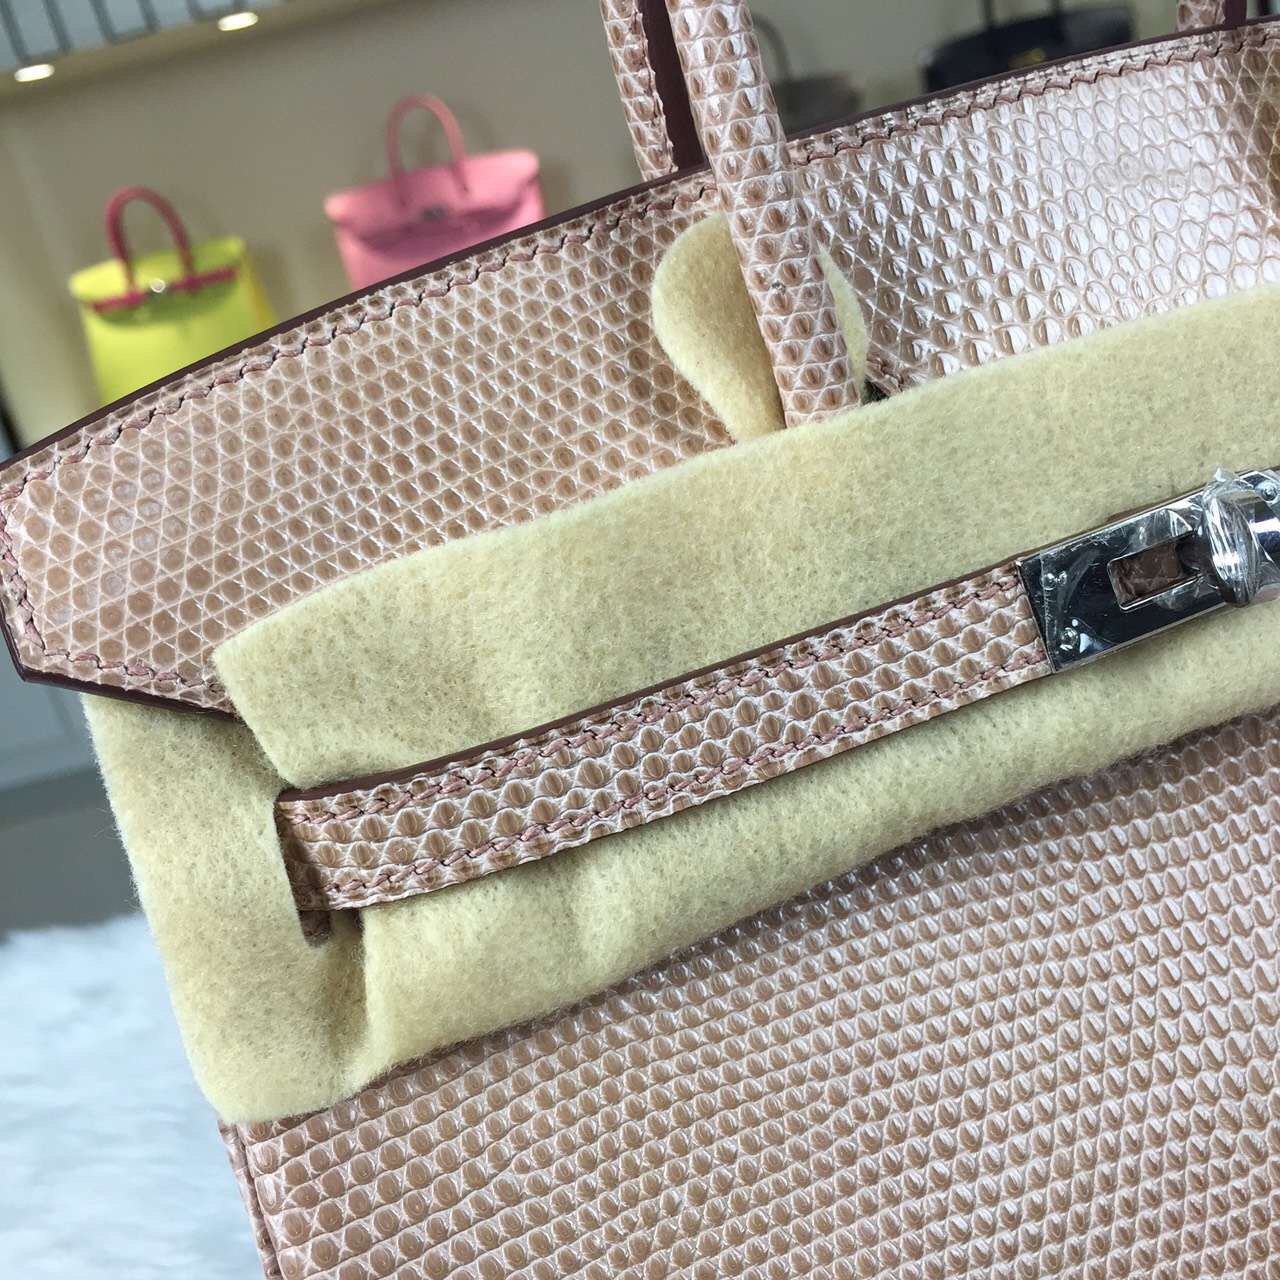 Hermes Customised France Imported Lizard Leather Birkin Bag30cm in Apricot